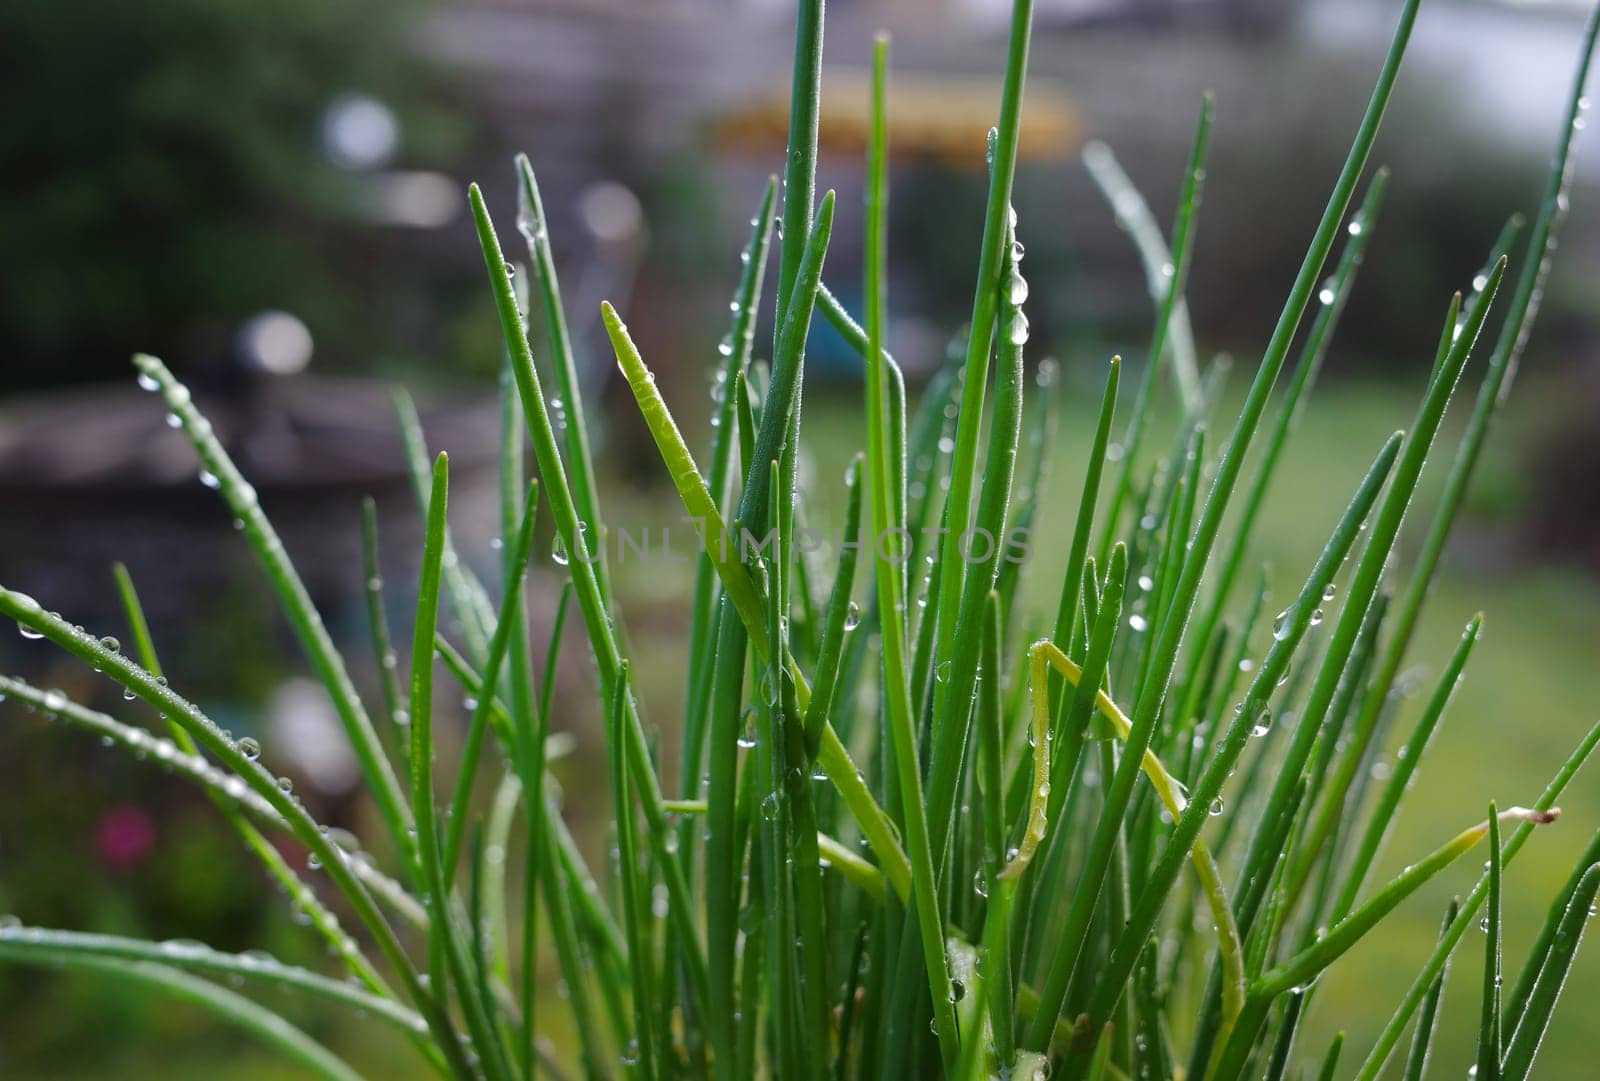 Raindrops on a chives plant. Blurred background